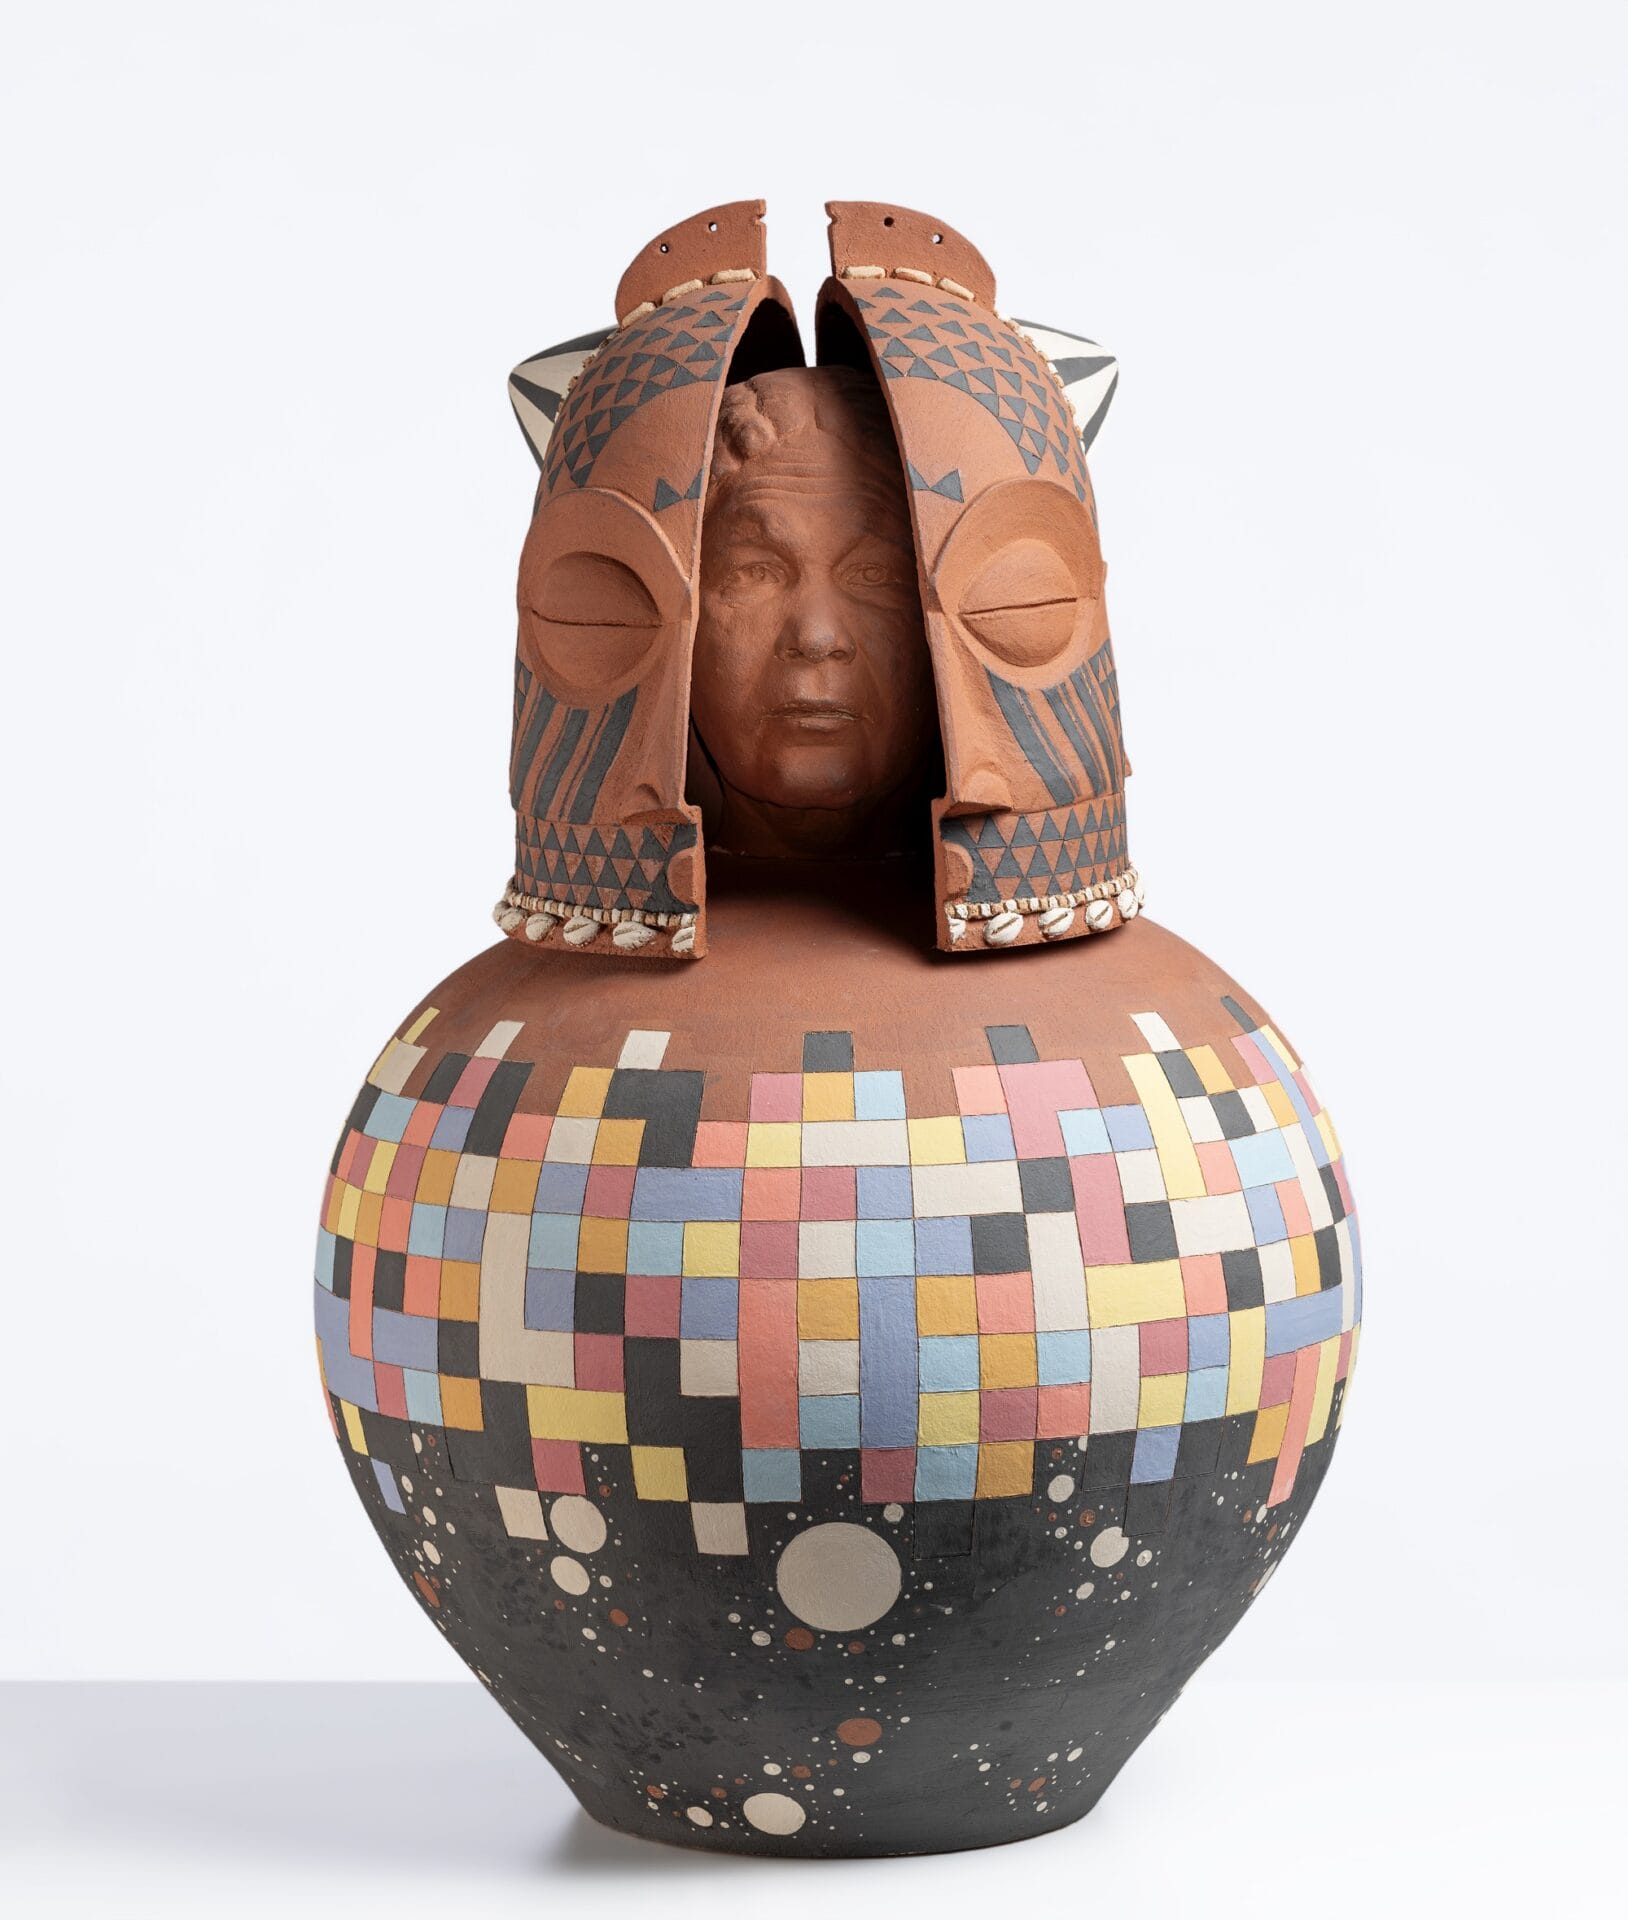 a ceramic sculpture with an abstract-designed vessel on the bottom and the bust of Mary Jane Seacole inside a traditional African mask